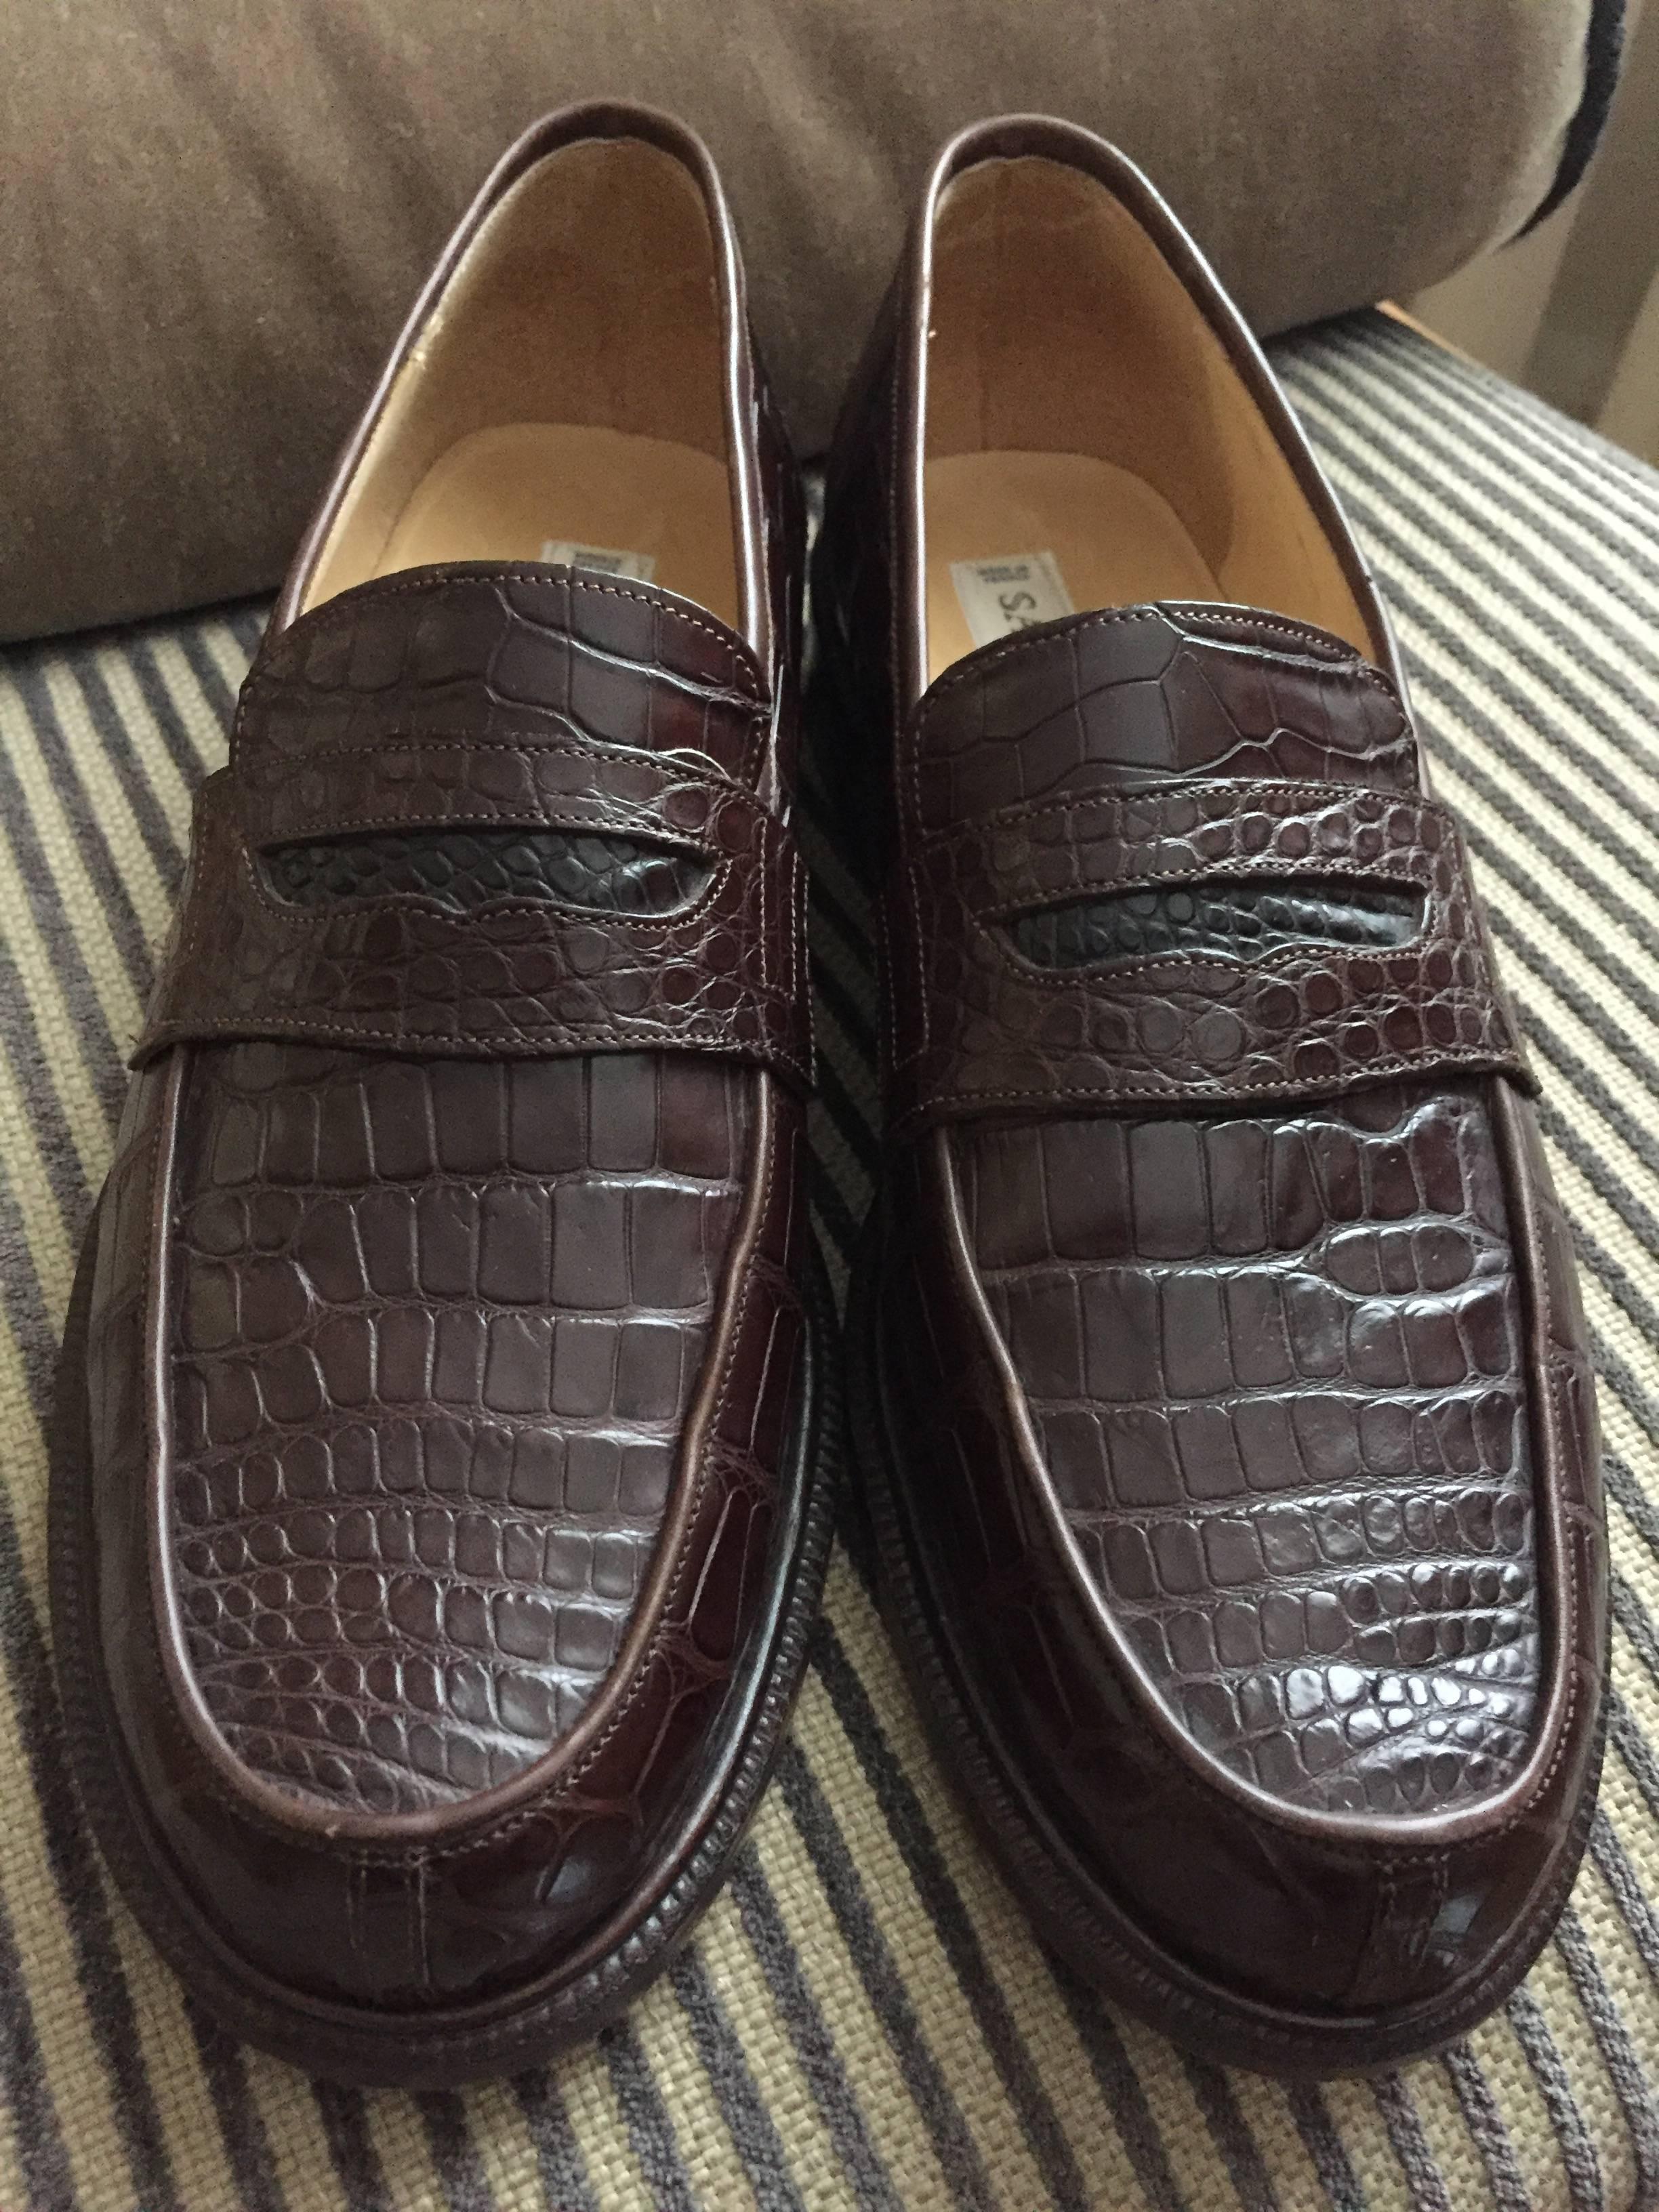 Sartore Paris Mens Brown Alligator Penny Loafers.
Size 42 B (9 1/2 US)
In excellent condition